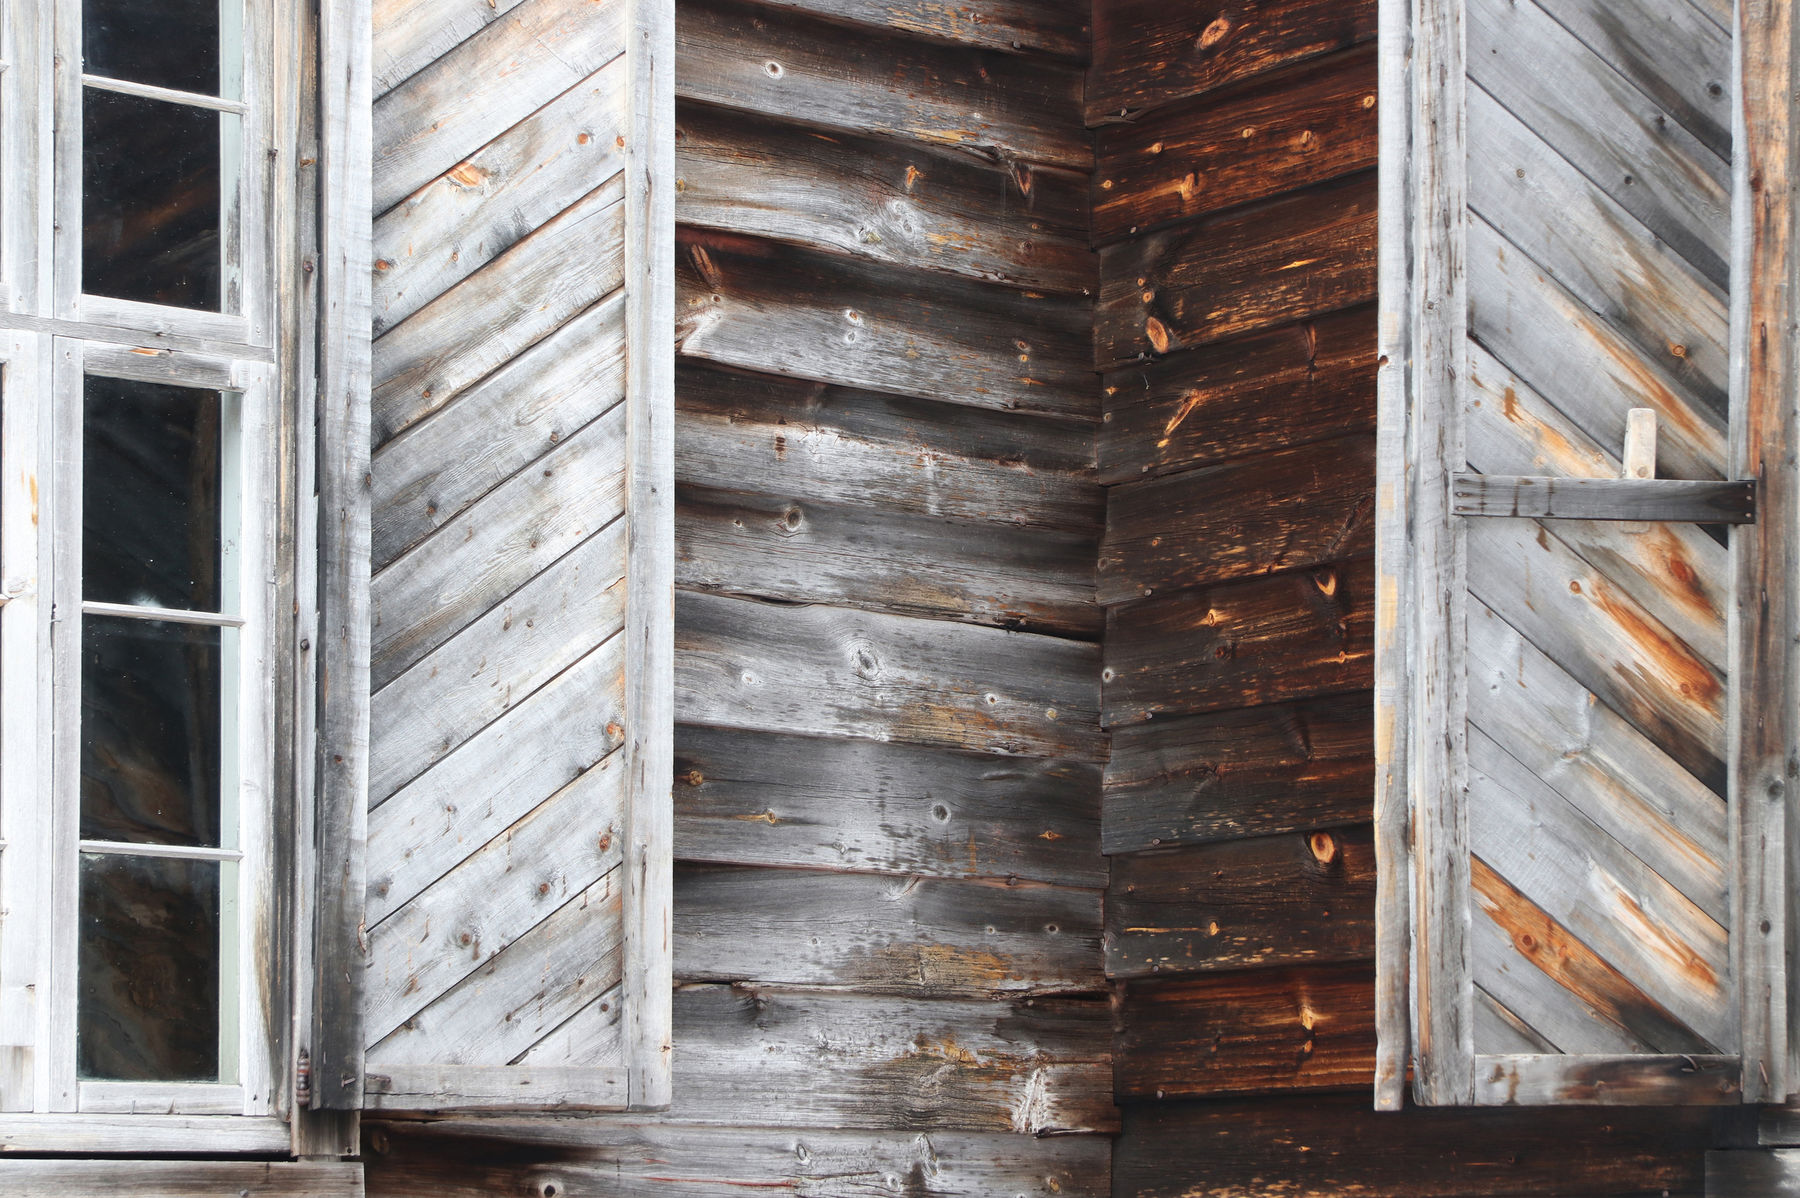 Close-up of a wooden building, antiqued by weather and natural aging.